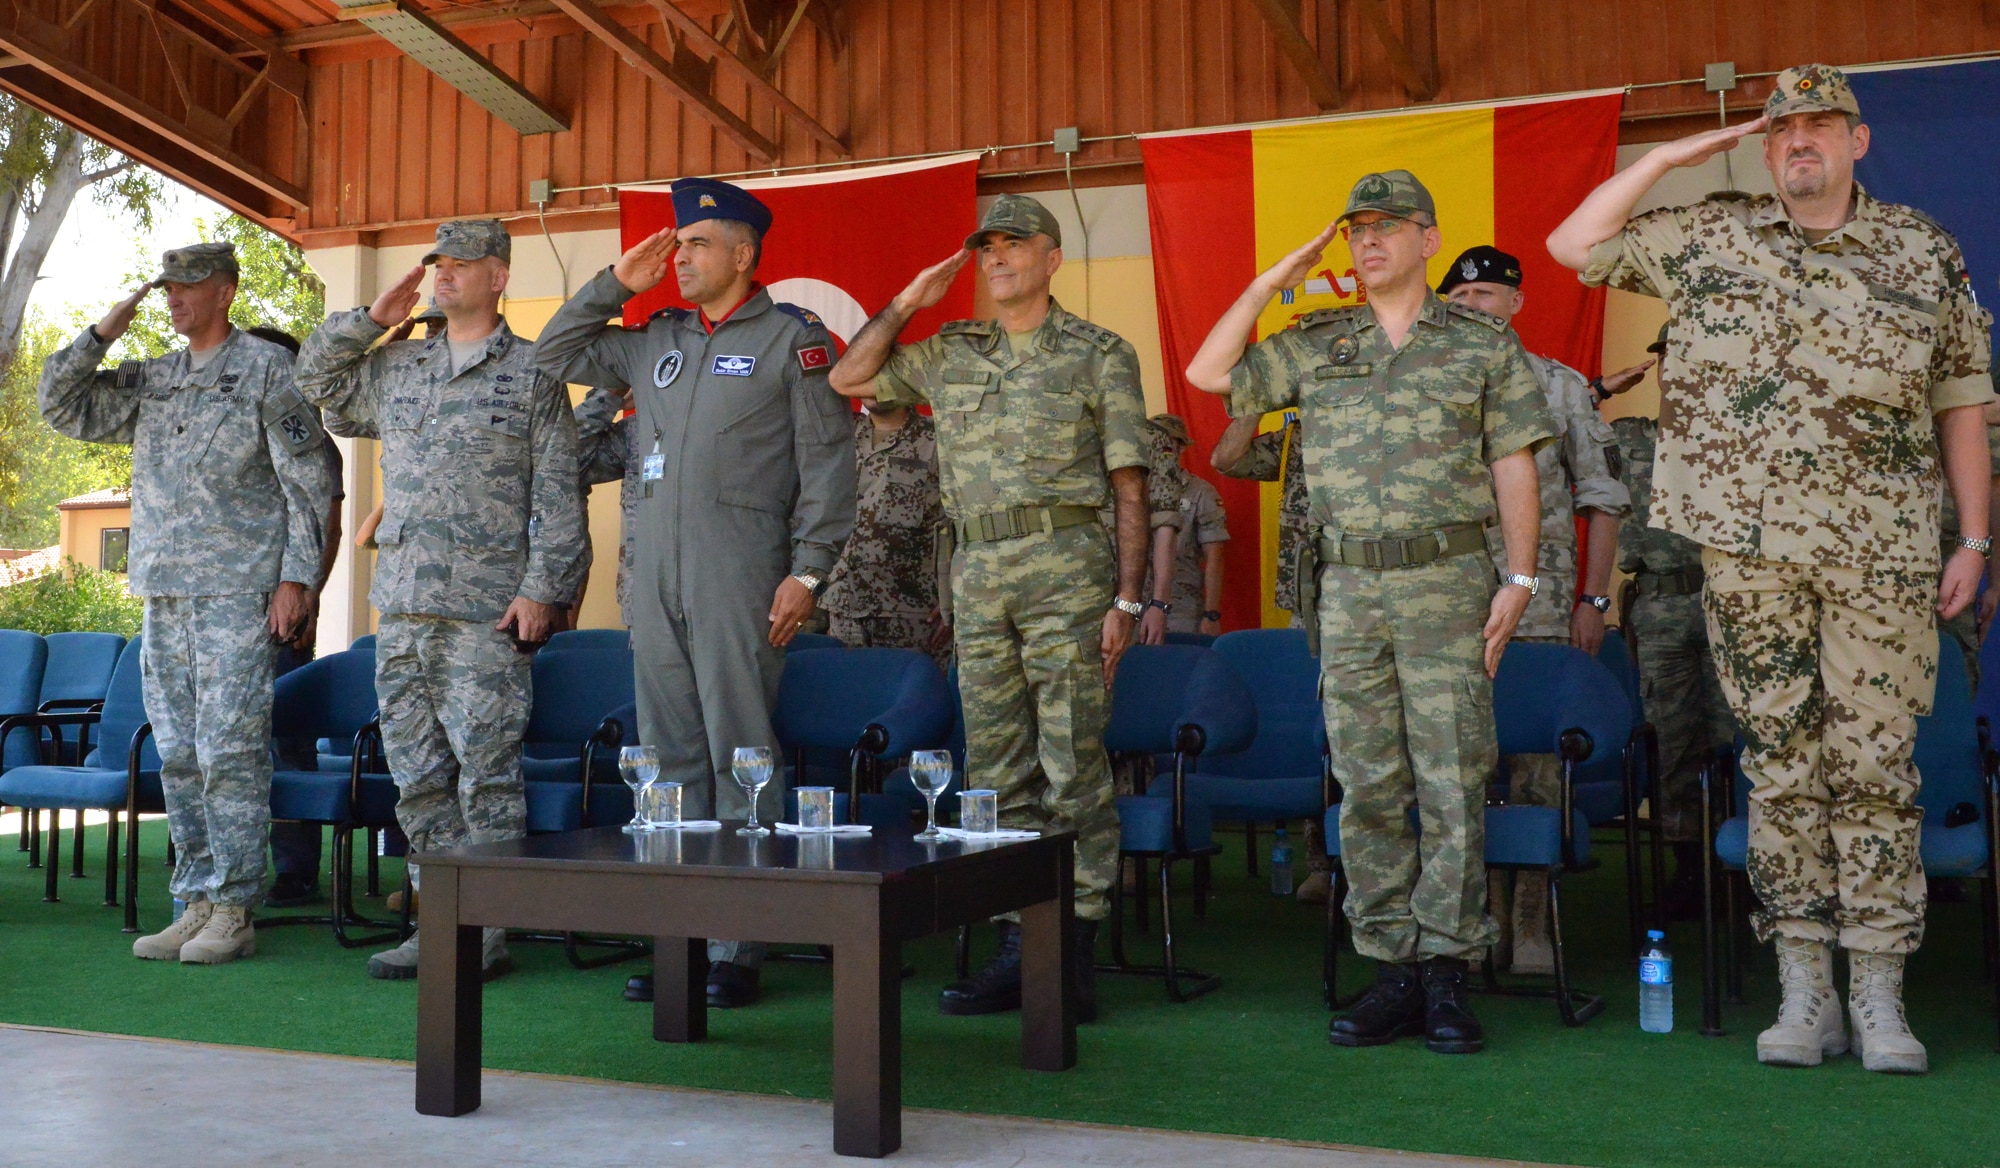 Senior leaders from the U.S. Air Force and Army, as well as the Turkish air force and Spanish army salute the flag during the playing of the Turkish and Spanish national anthems during a Transfer of Authority ceremony, July 22, 2015, at Incirlik Air Base, Turkey. The Spanish unit will serve three more rotations in the city of Adana in support of Operation Active Fence. (U.S. Air Force photo by Senior Airman Michael Battles/Released)